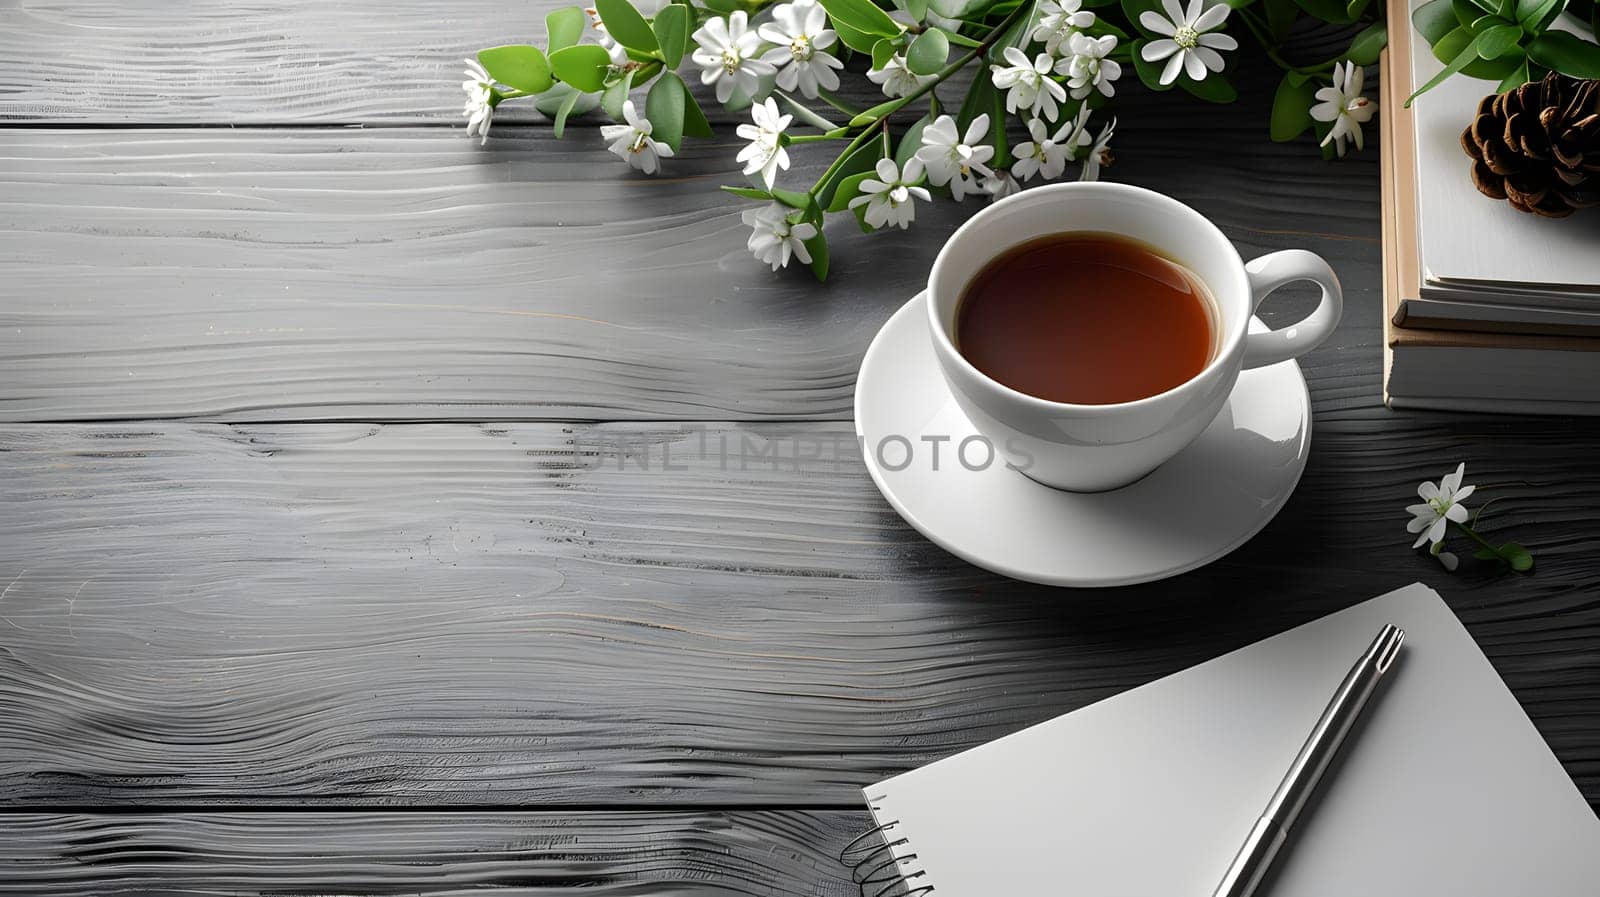 A cup of tea on a saucer, set on a wooden table with serveware by Nadtochiy